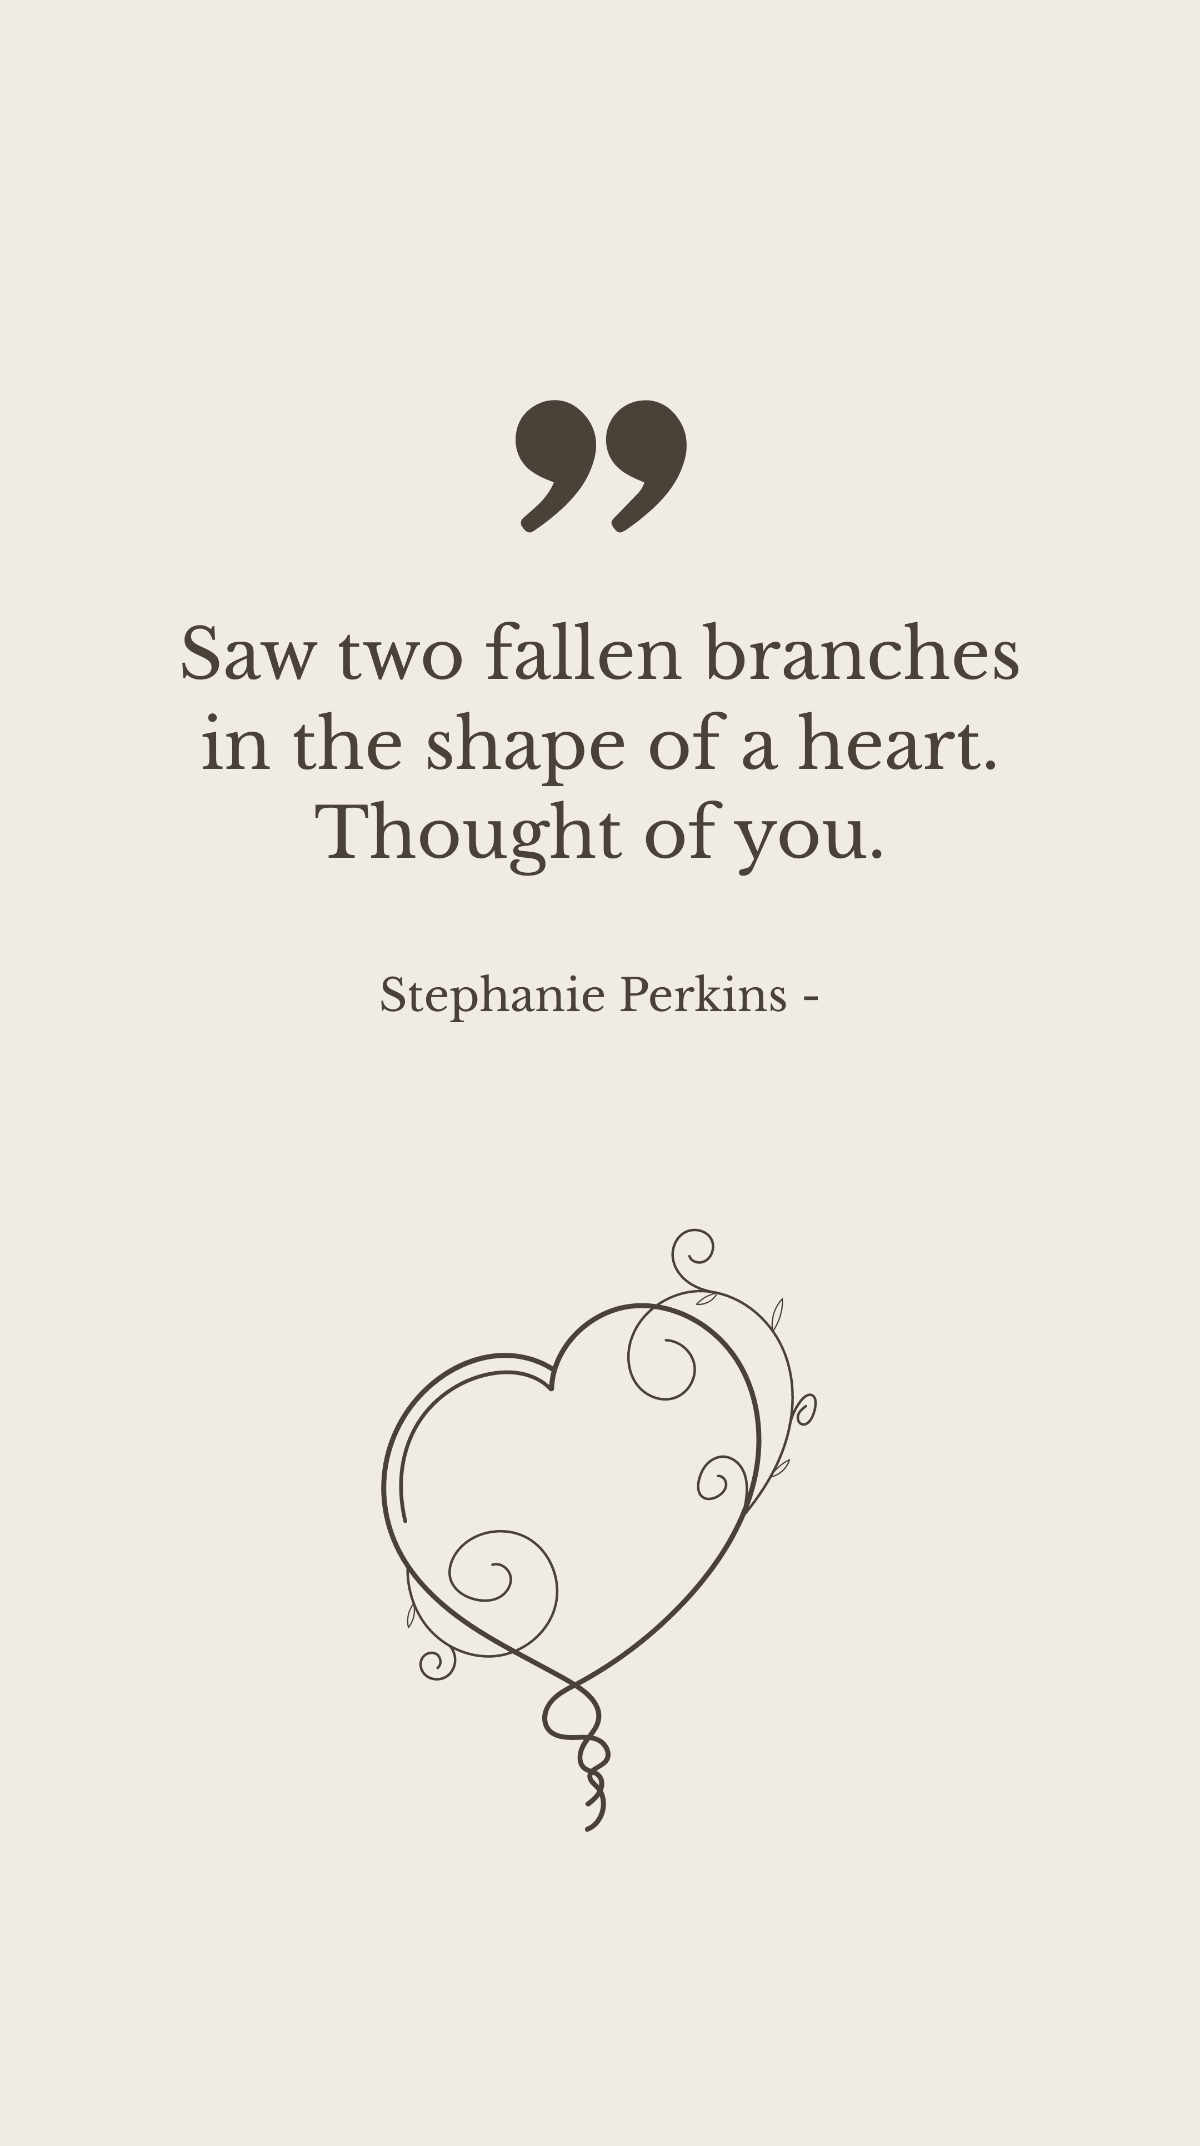 Stephanie Perkins - Saw two fallen branches in the shape of a heart. Thought of you.